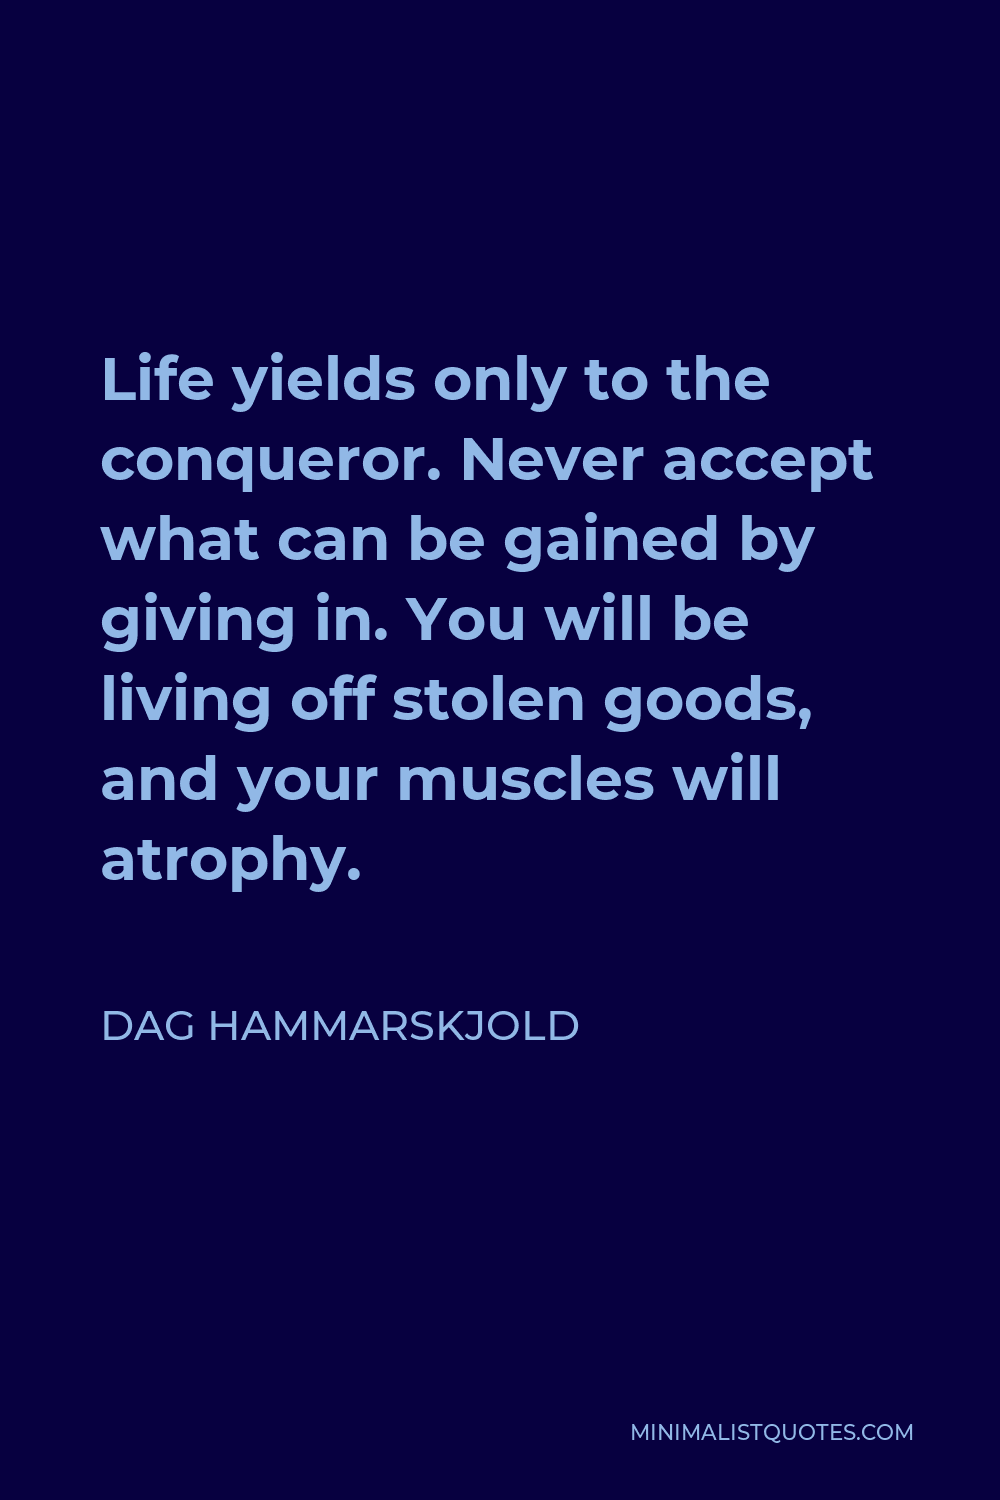 Dag Hammarskjold Quote - Life yields only to the conqueror. Never accept what can be gained by giving in. You will be living off stolen goods, and your muscles will atrophy.